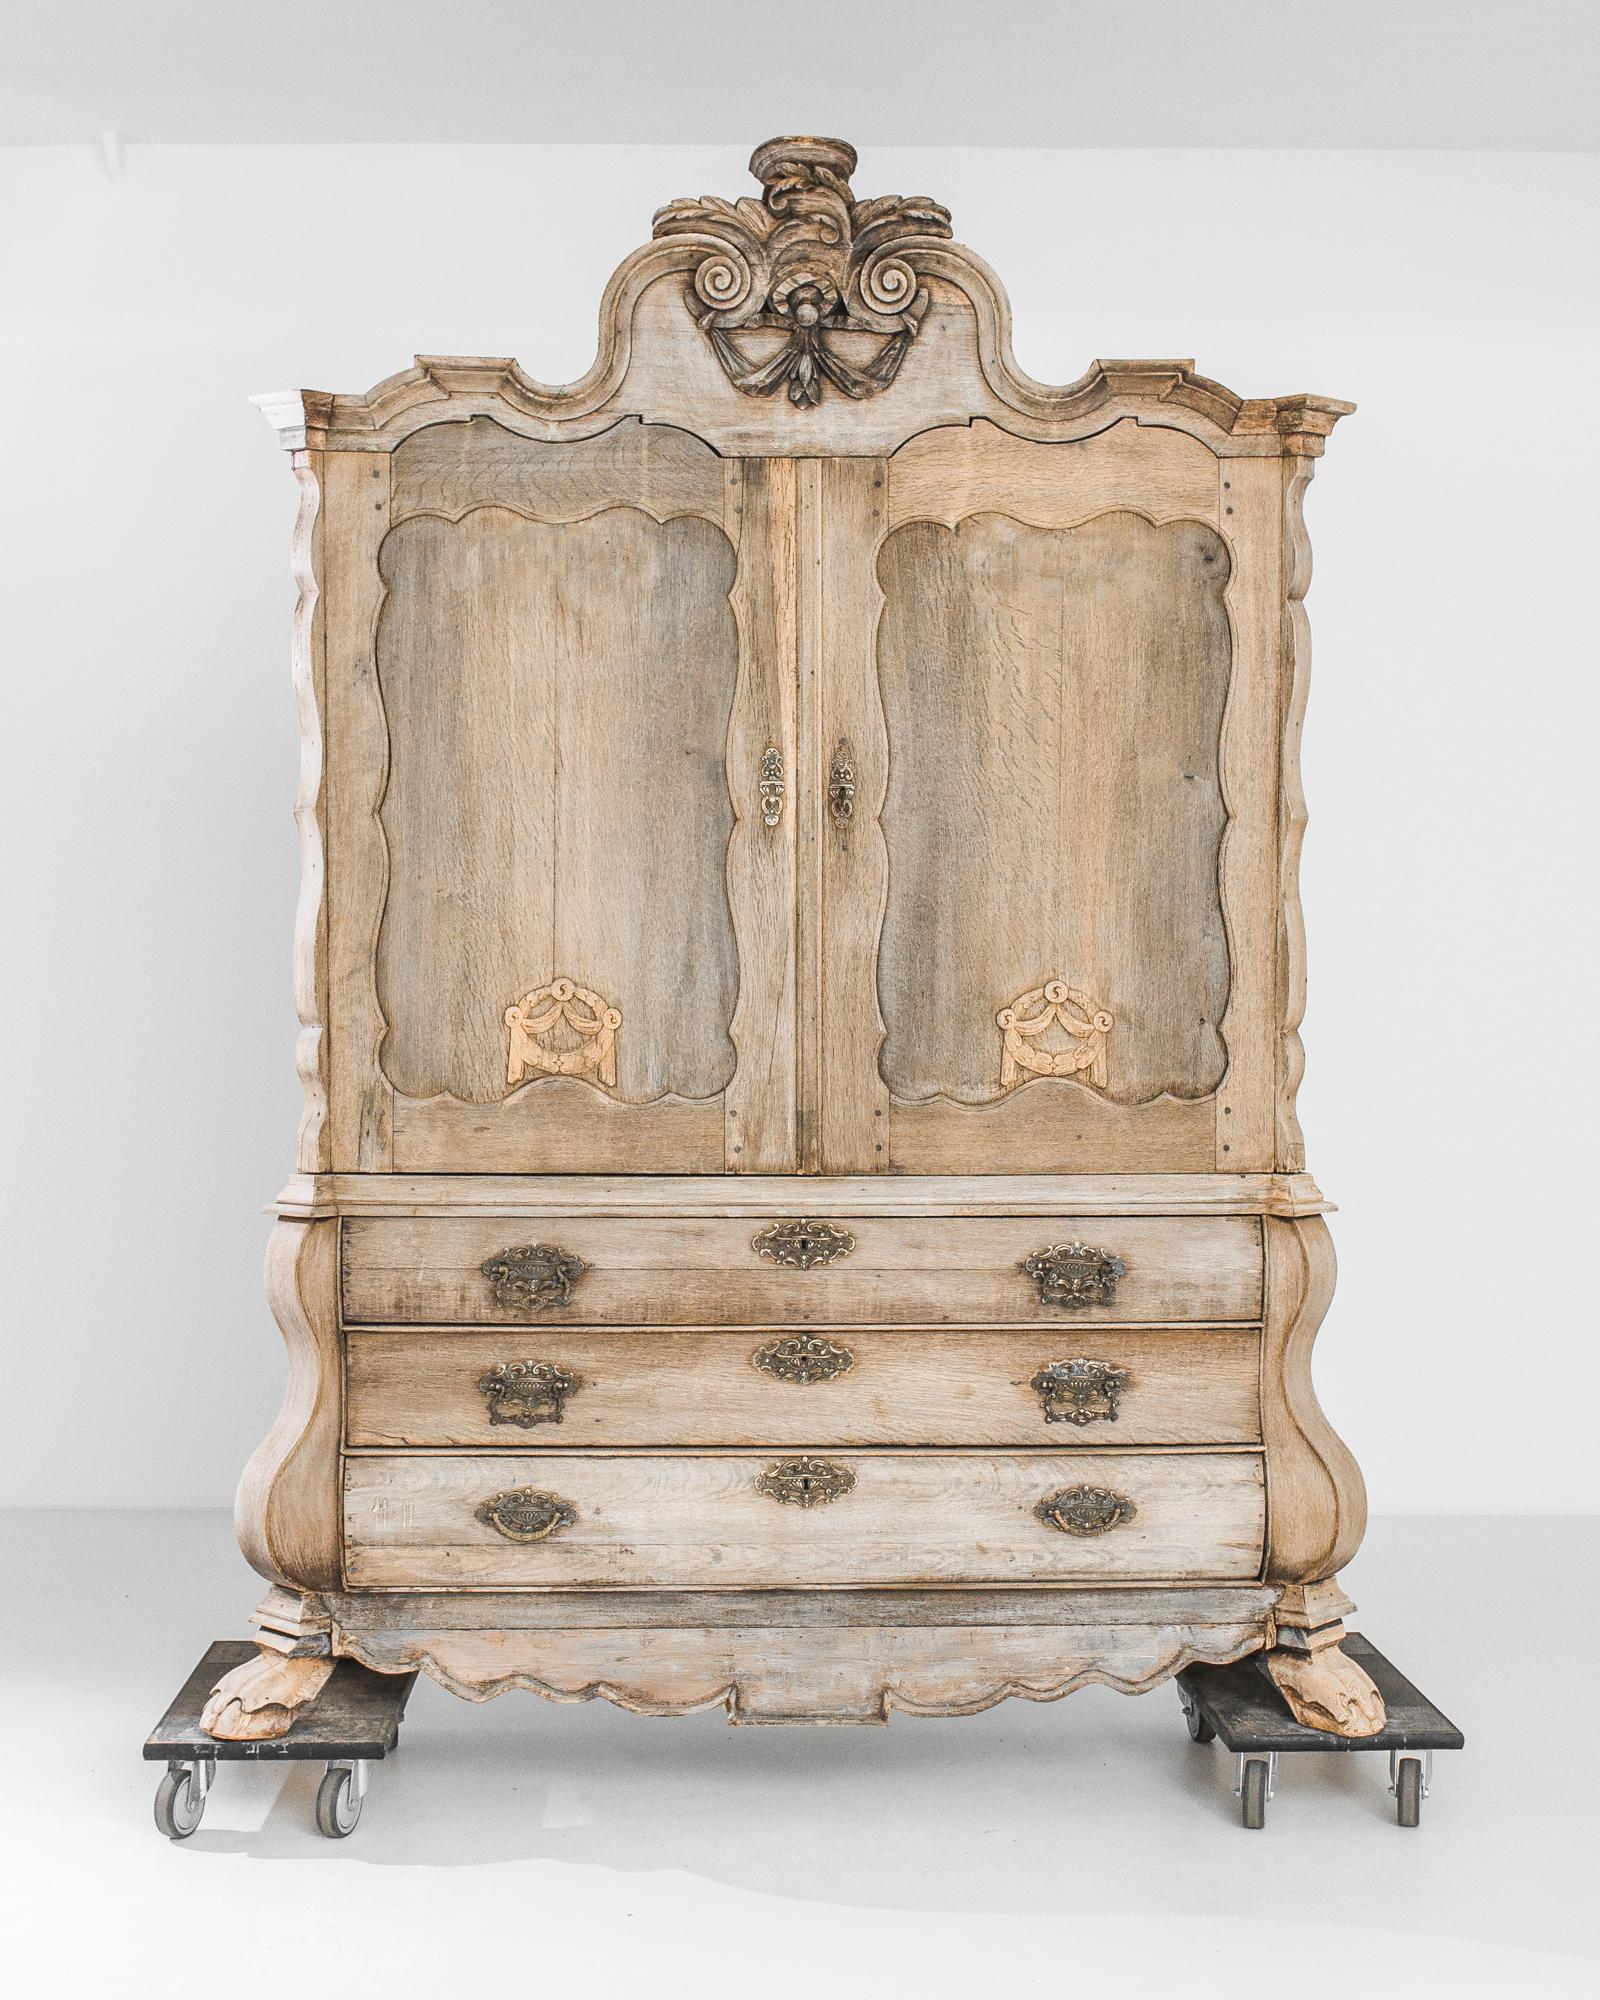 Indulge in the opulence of the 1780s with the Dutch Bleached Oak Cabinet, a paragon of unparalleled elegance. This resplendent piece features two main doors above, complemented by three drawers below, creating a harmonious and balanced silhouette.